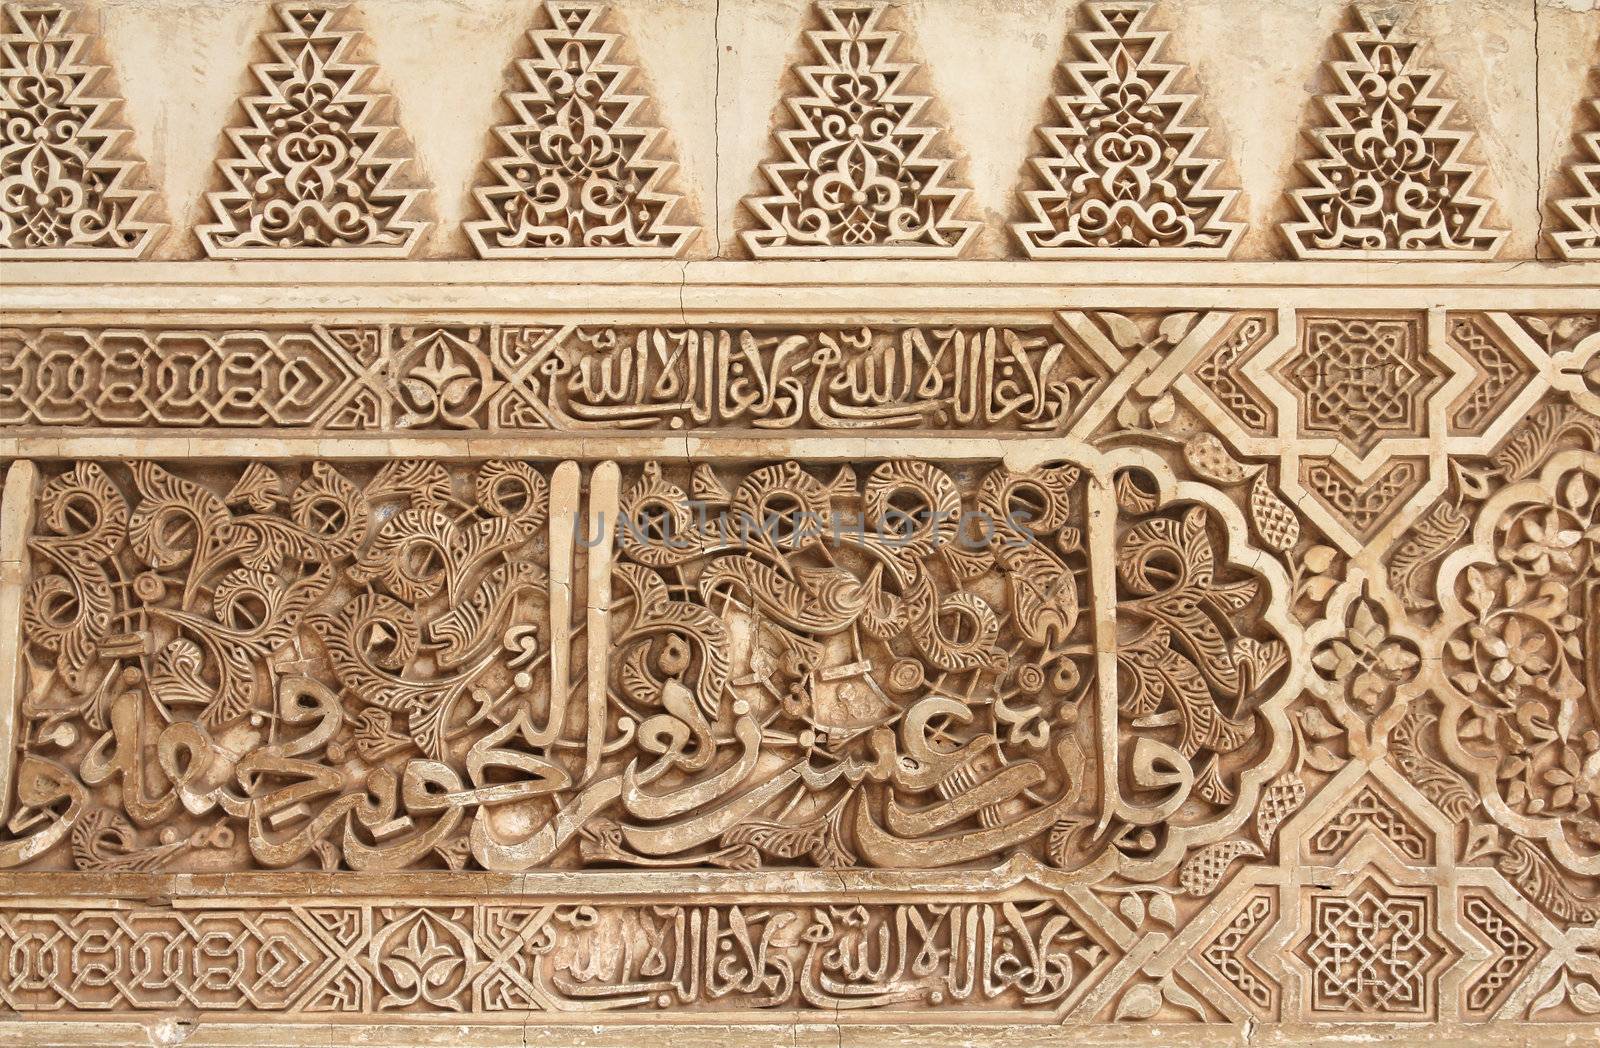 Alhambra castle, Nasrid palace detail. Granada in Andalusia region of Spain. UNESCO World Heritage Site.